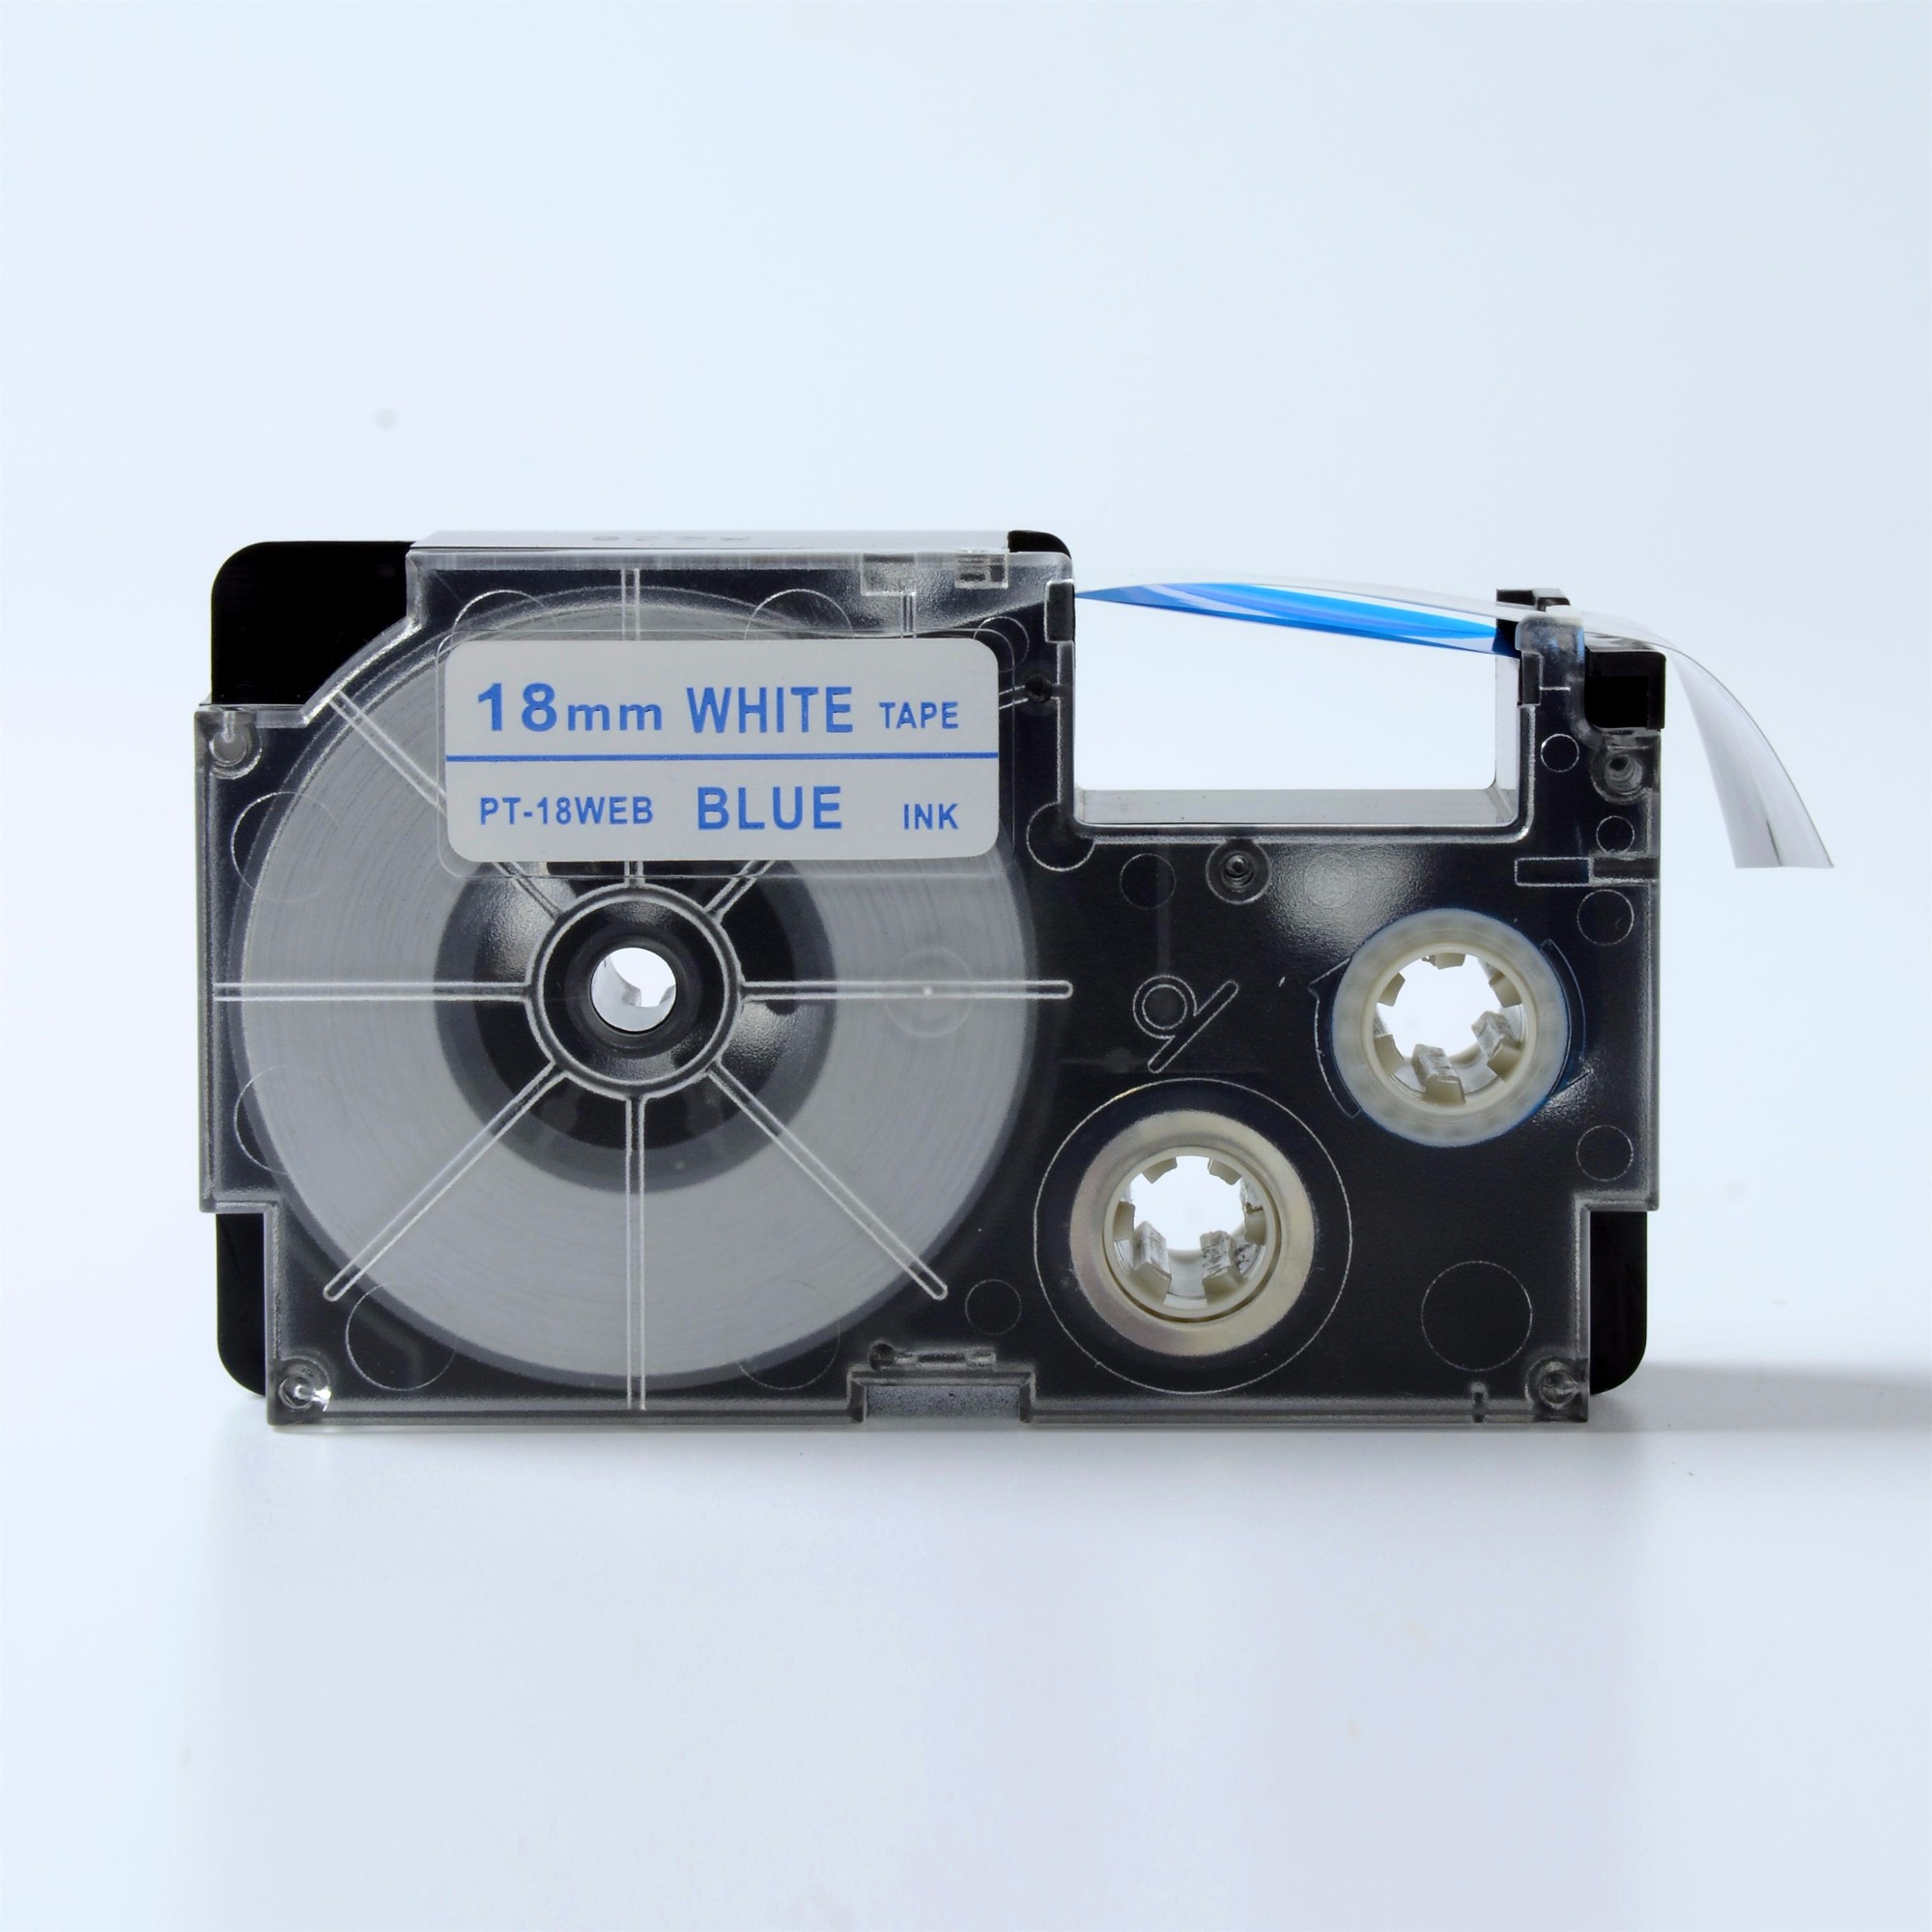 Compatible label tape for Casio XR-18WEB1